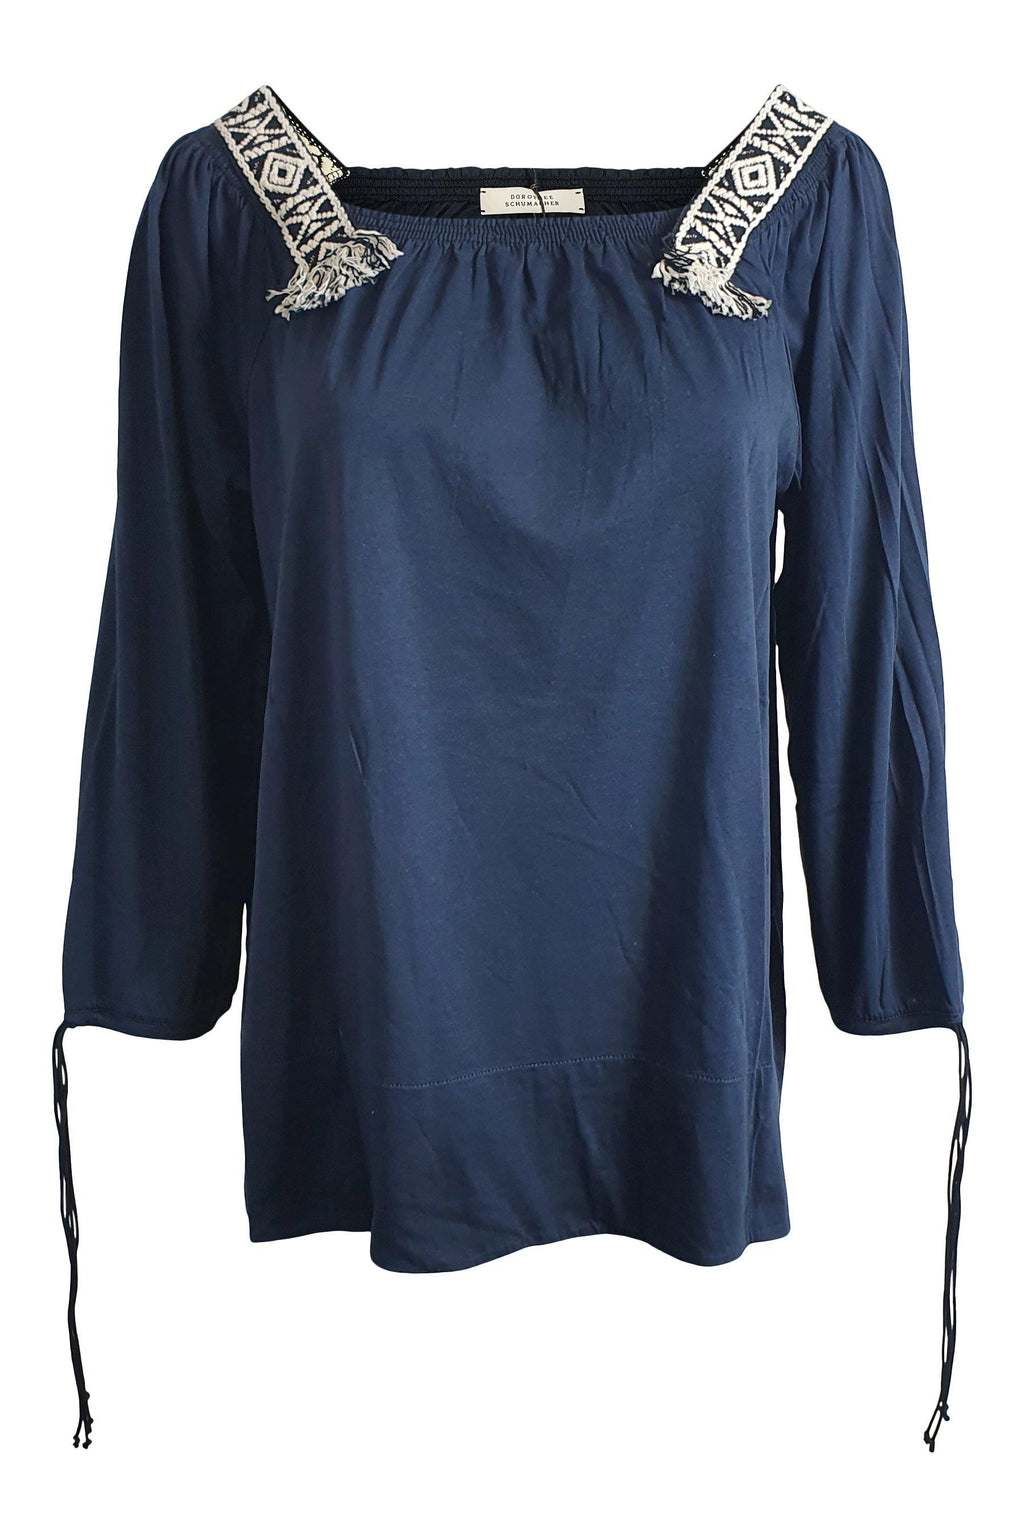 DOROTHEE SCHUMACER Navy Blue Cotton Soft Charm Shirt (Size 1)-The Freperie